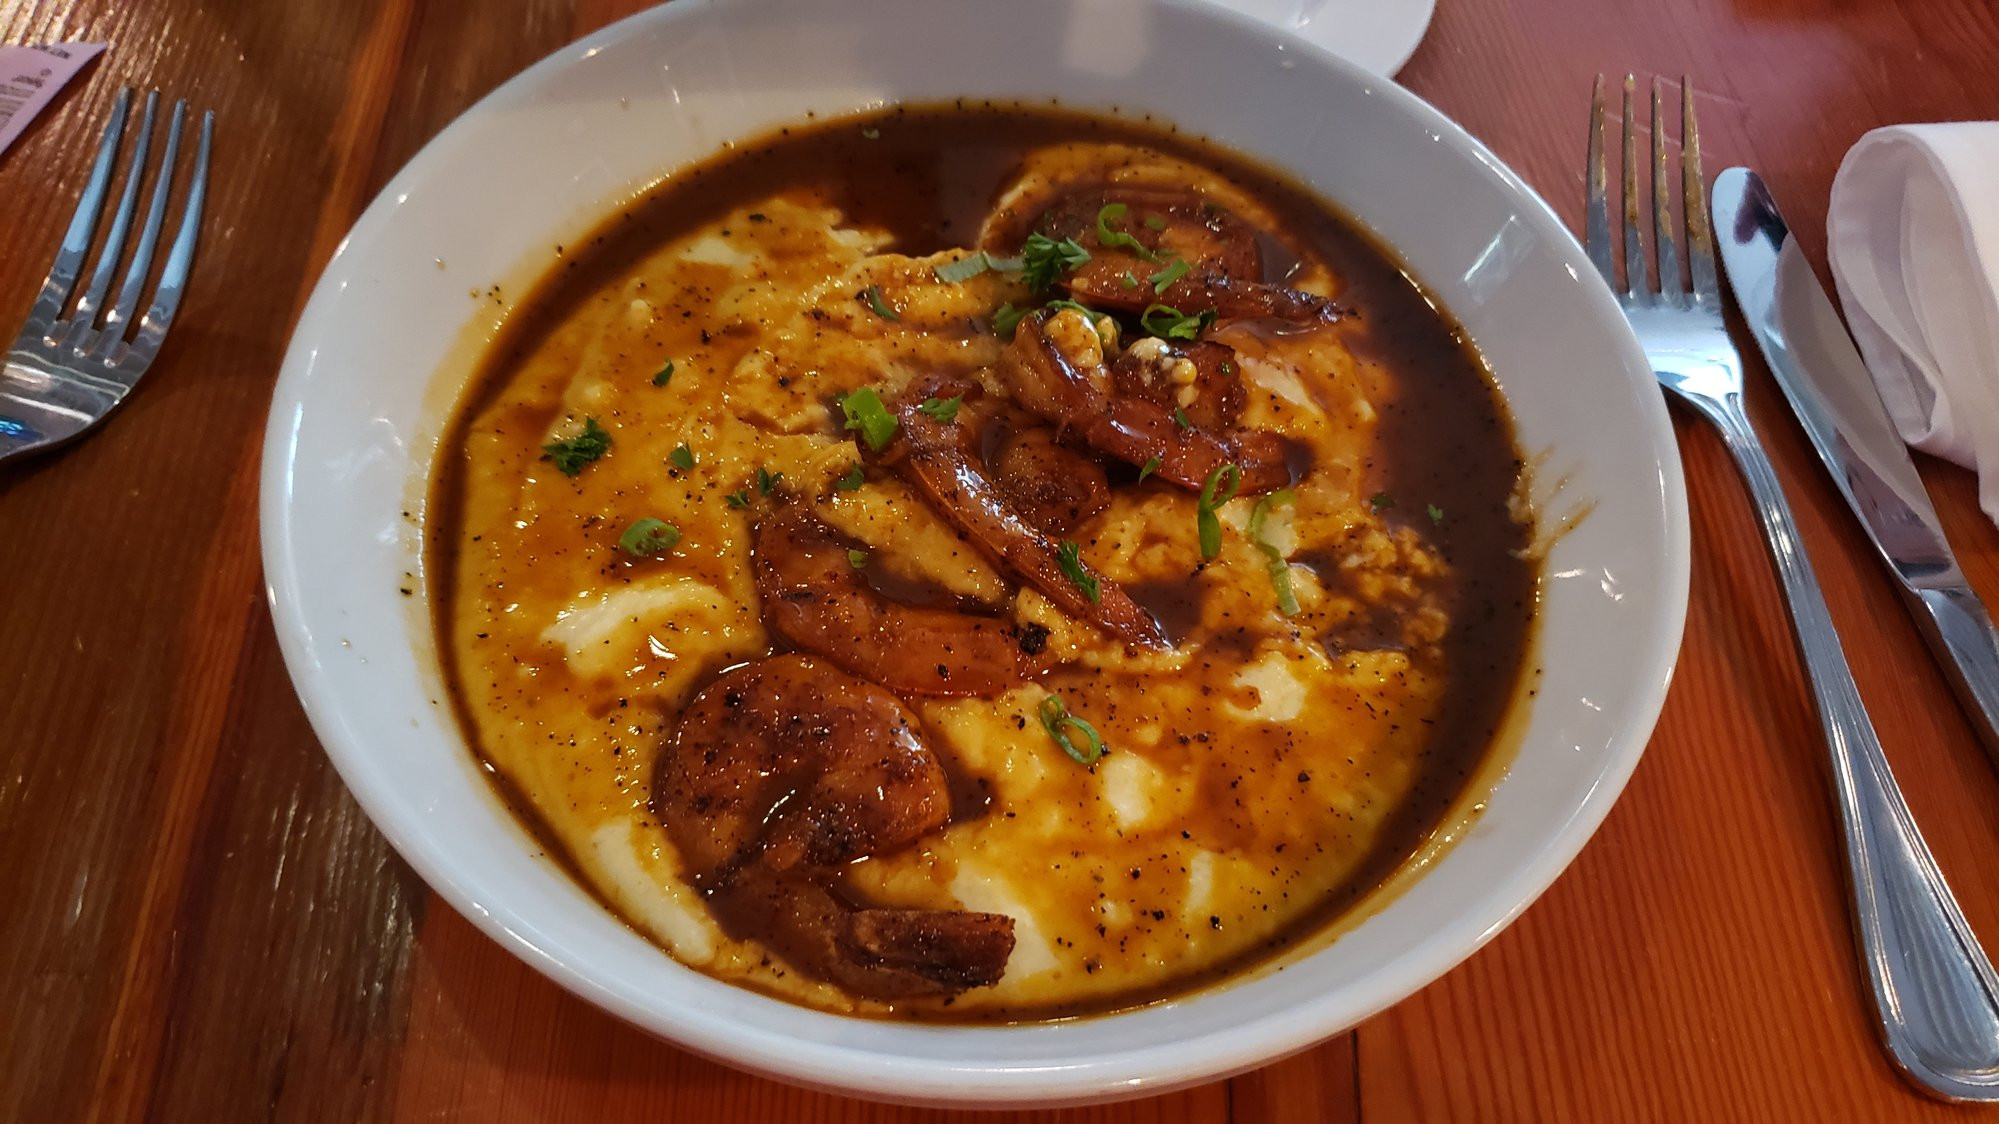 New Orleans Bbq Shrimp And Grits
 New Orleans BBQ Shrimp and Grits CorvetteForum